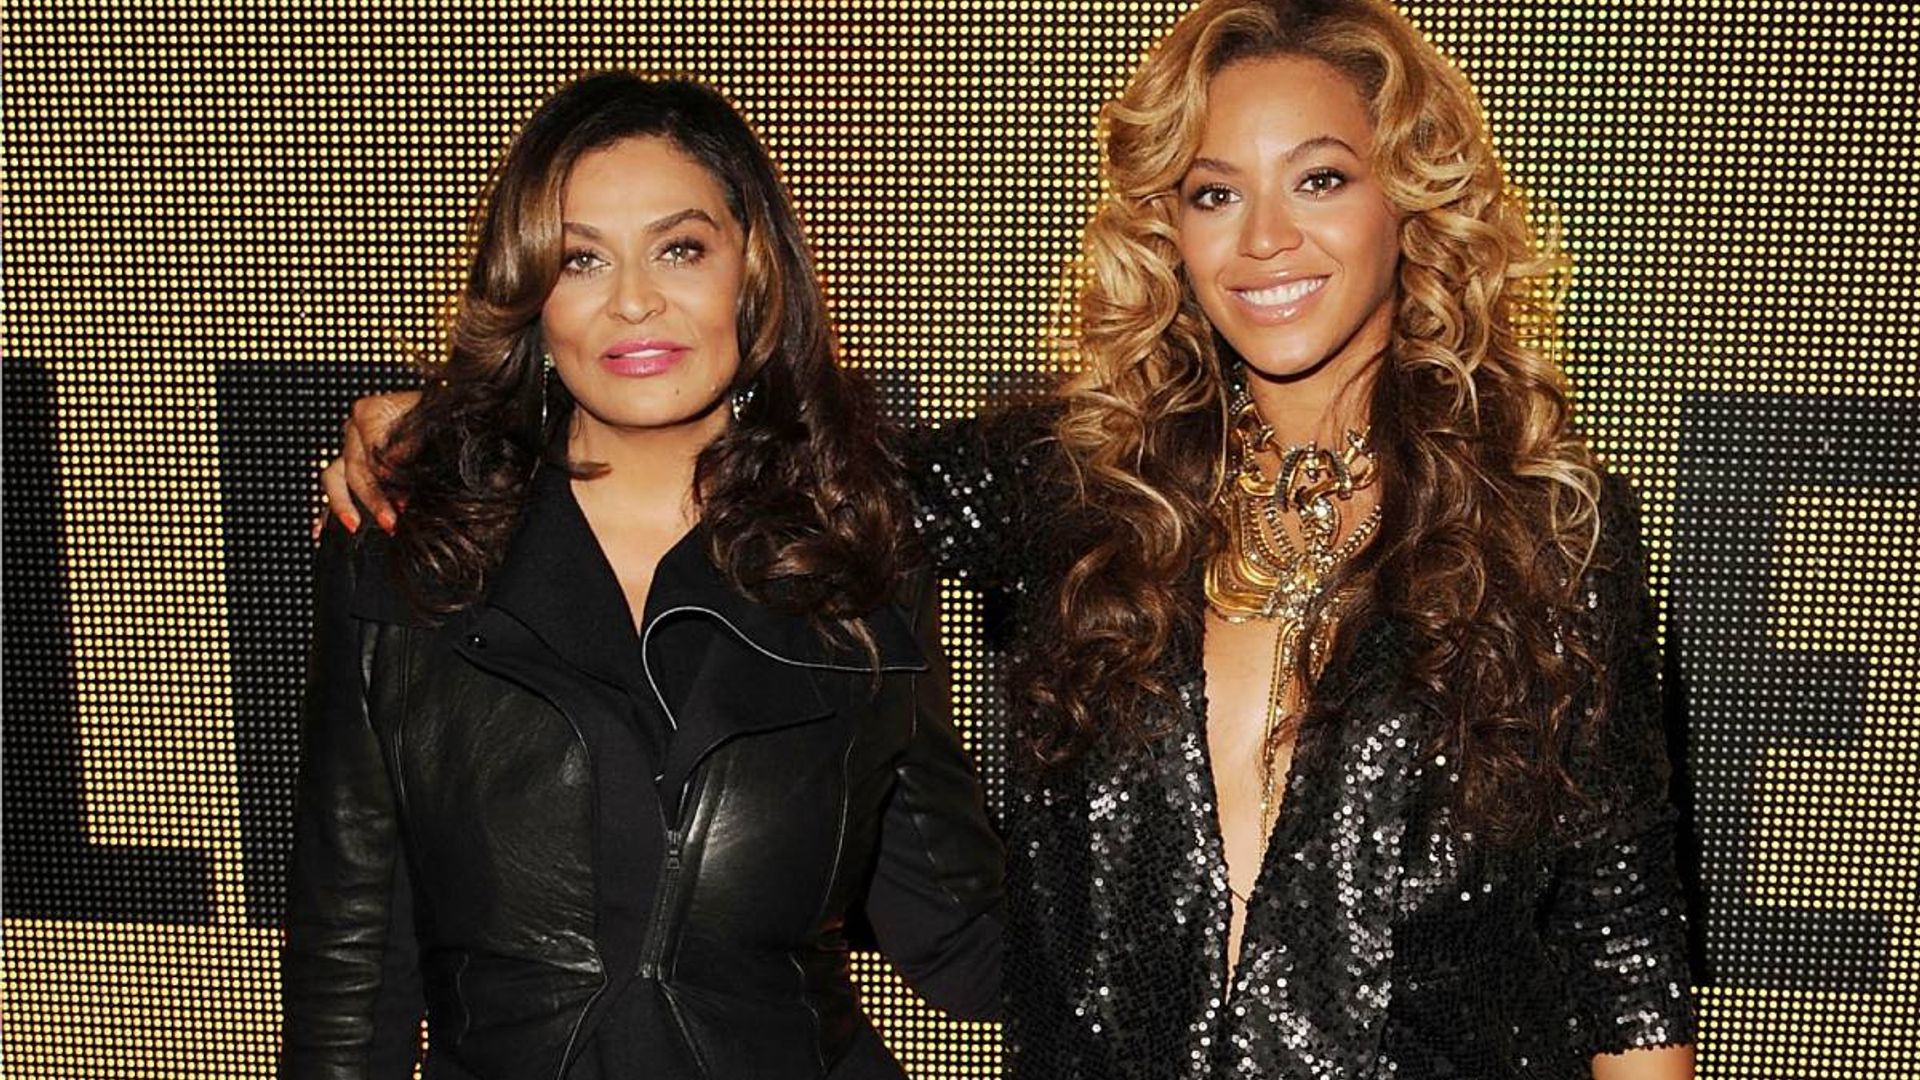 Beyoncé's mother gushes over 'beautiful grandson' in adorable never-before-seen video